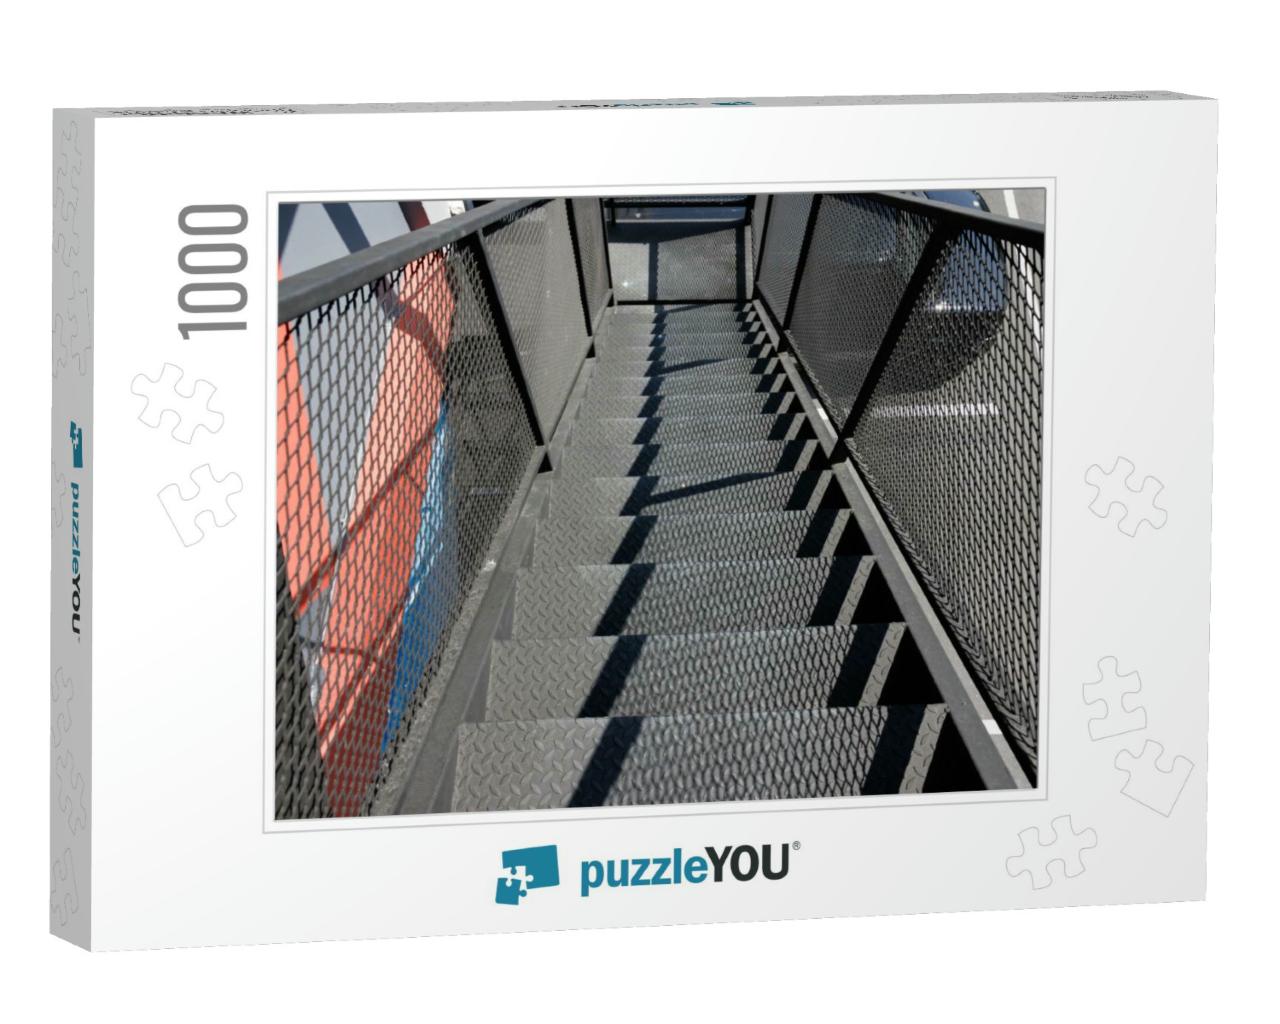 Outdoor Fire Escape Metal Stair. Light & Shadow on Steel... Jigsaw Puzzle with 1000 pieces